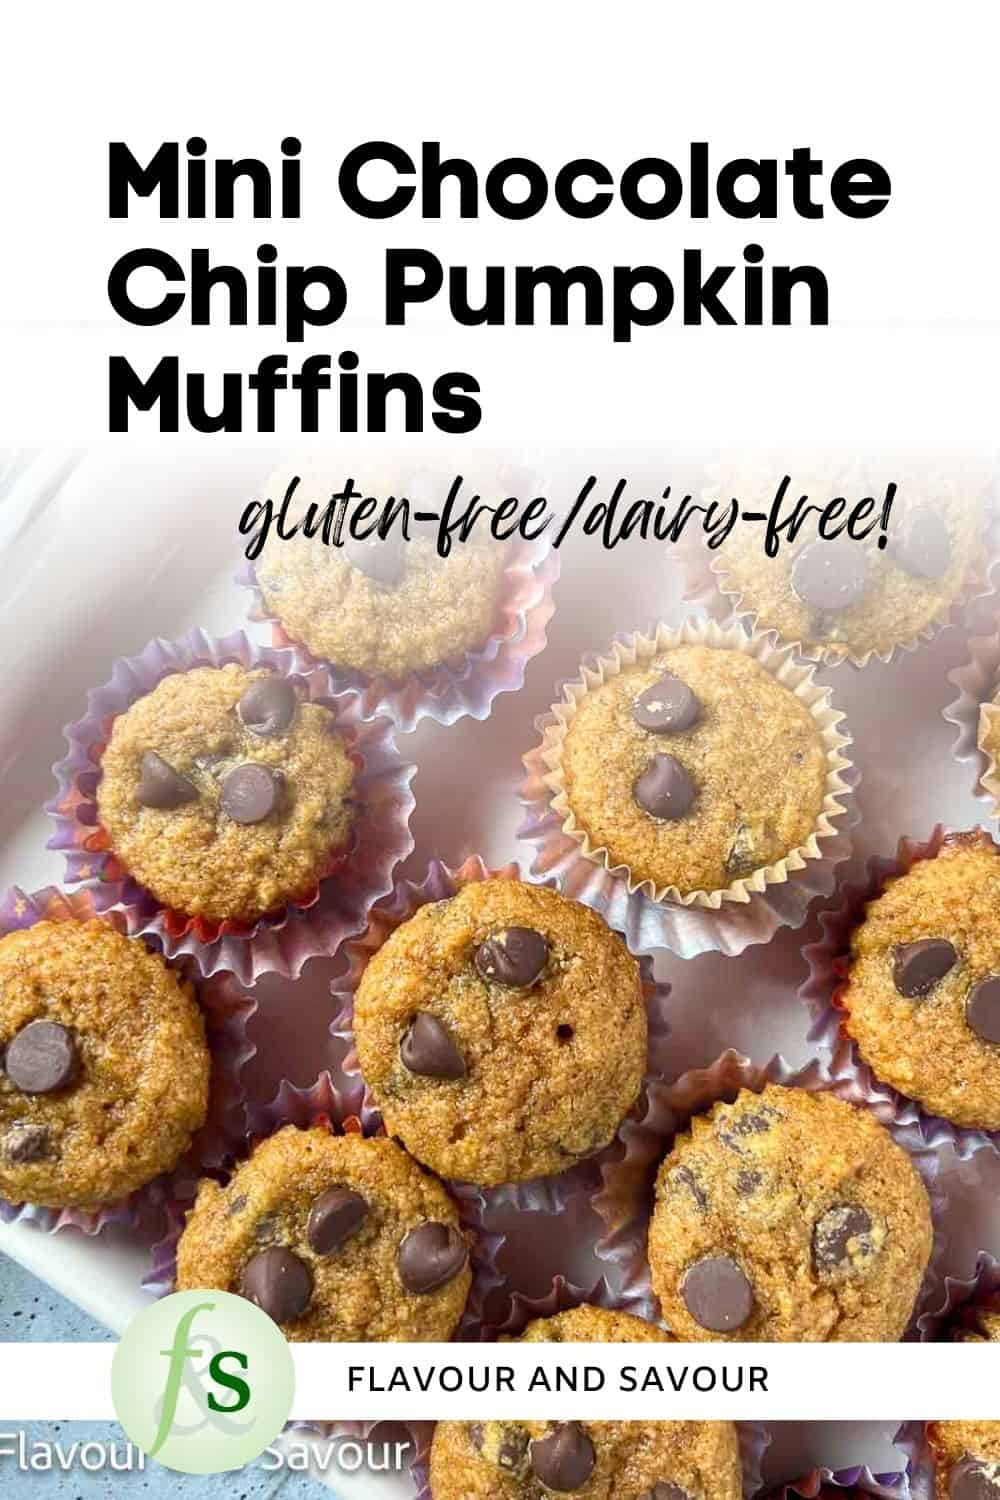 Image with text overlay for gluten-free mini chocolate chip pumpkin muffins.